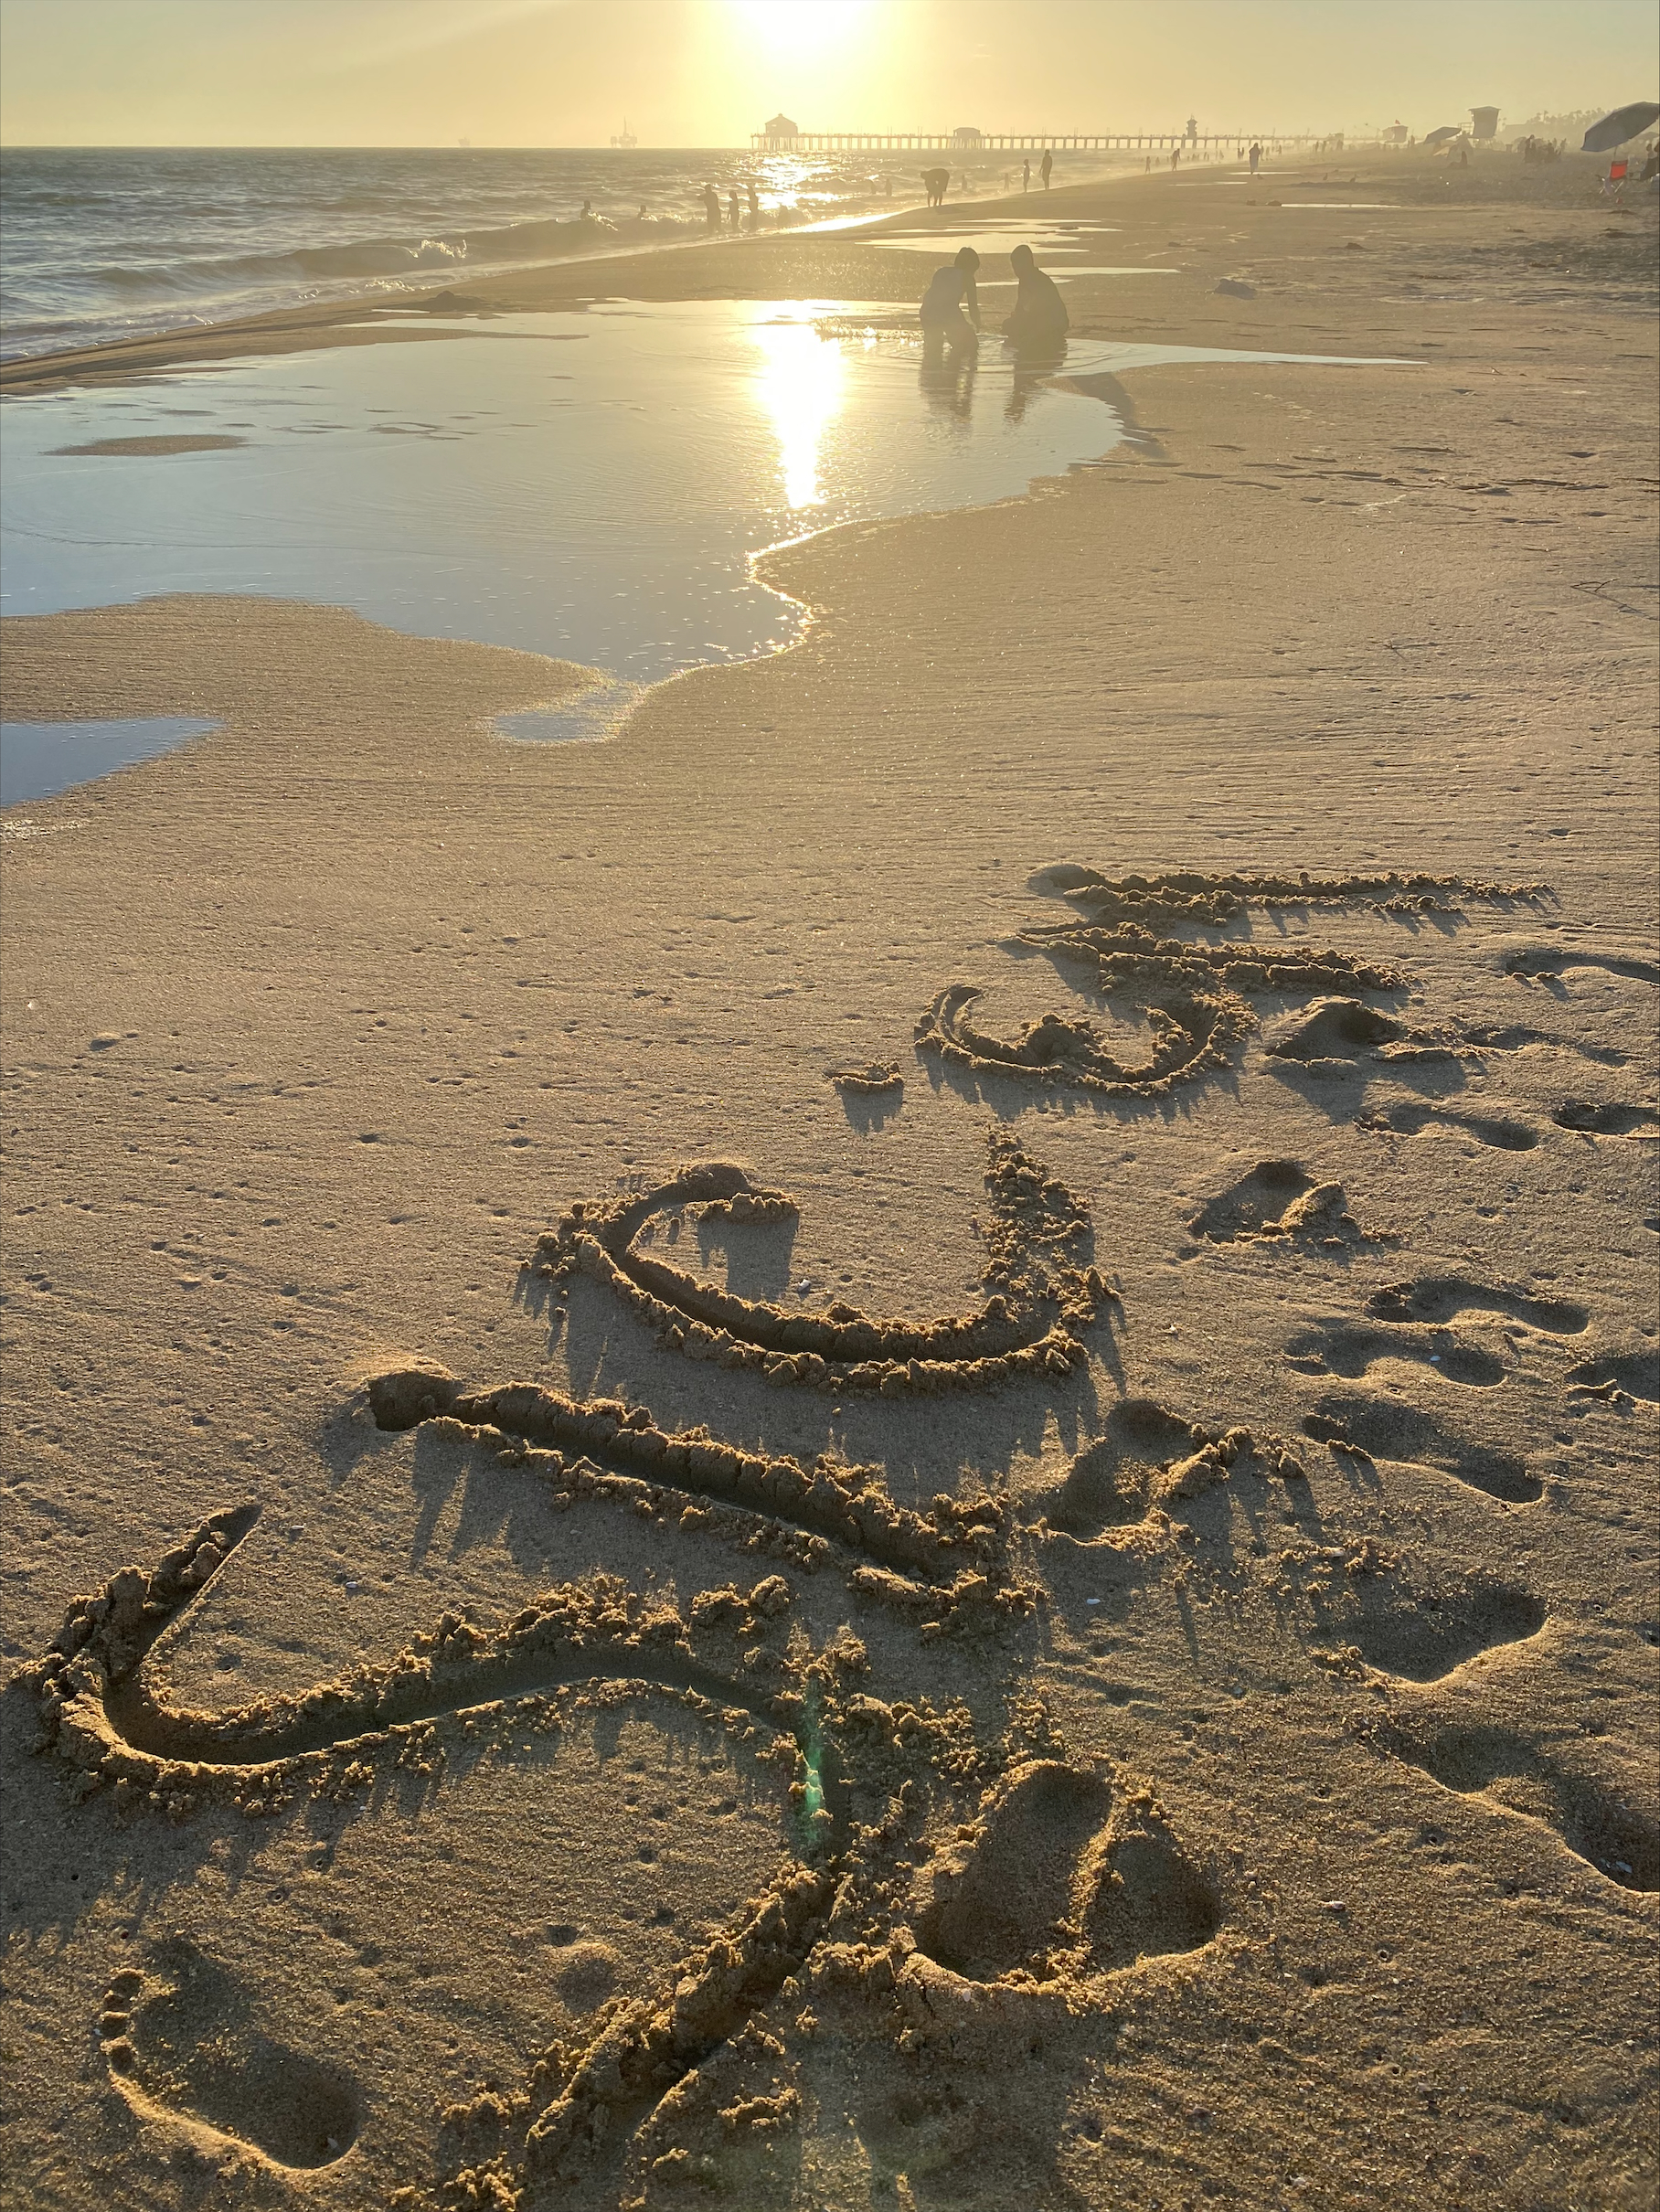 "Sic 'em" carved in the beach sand at sunset